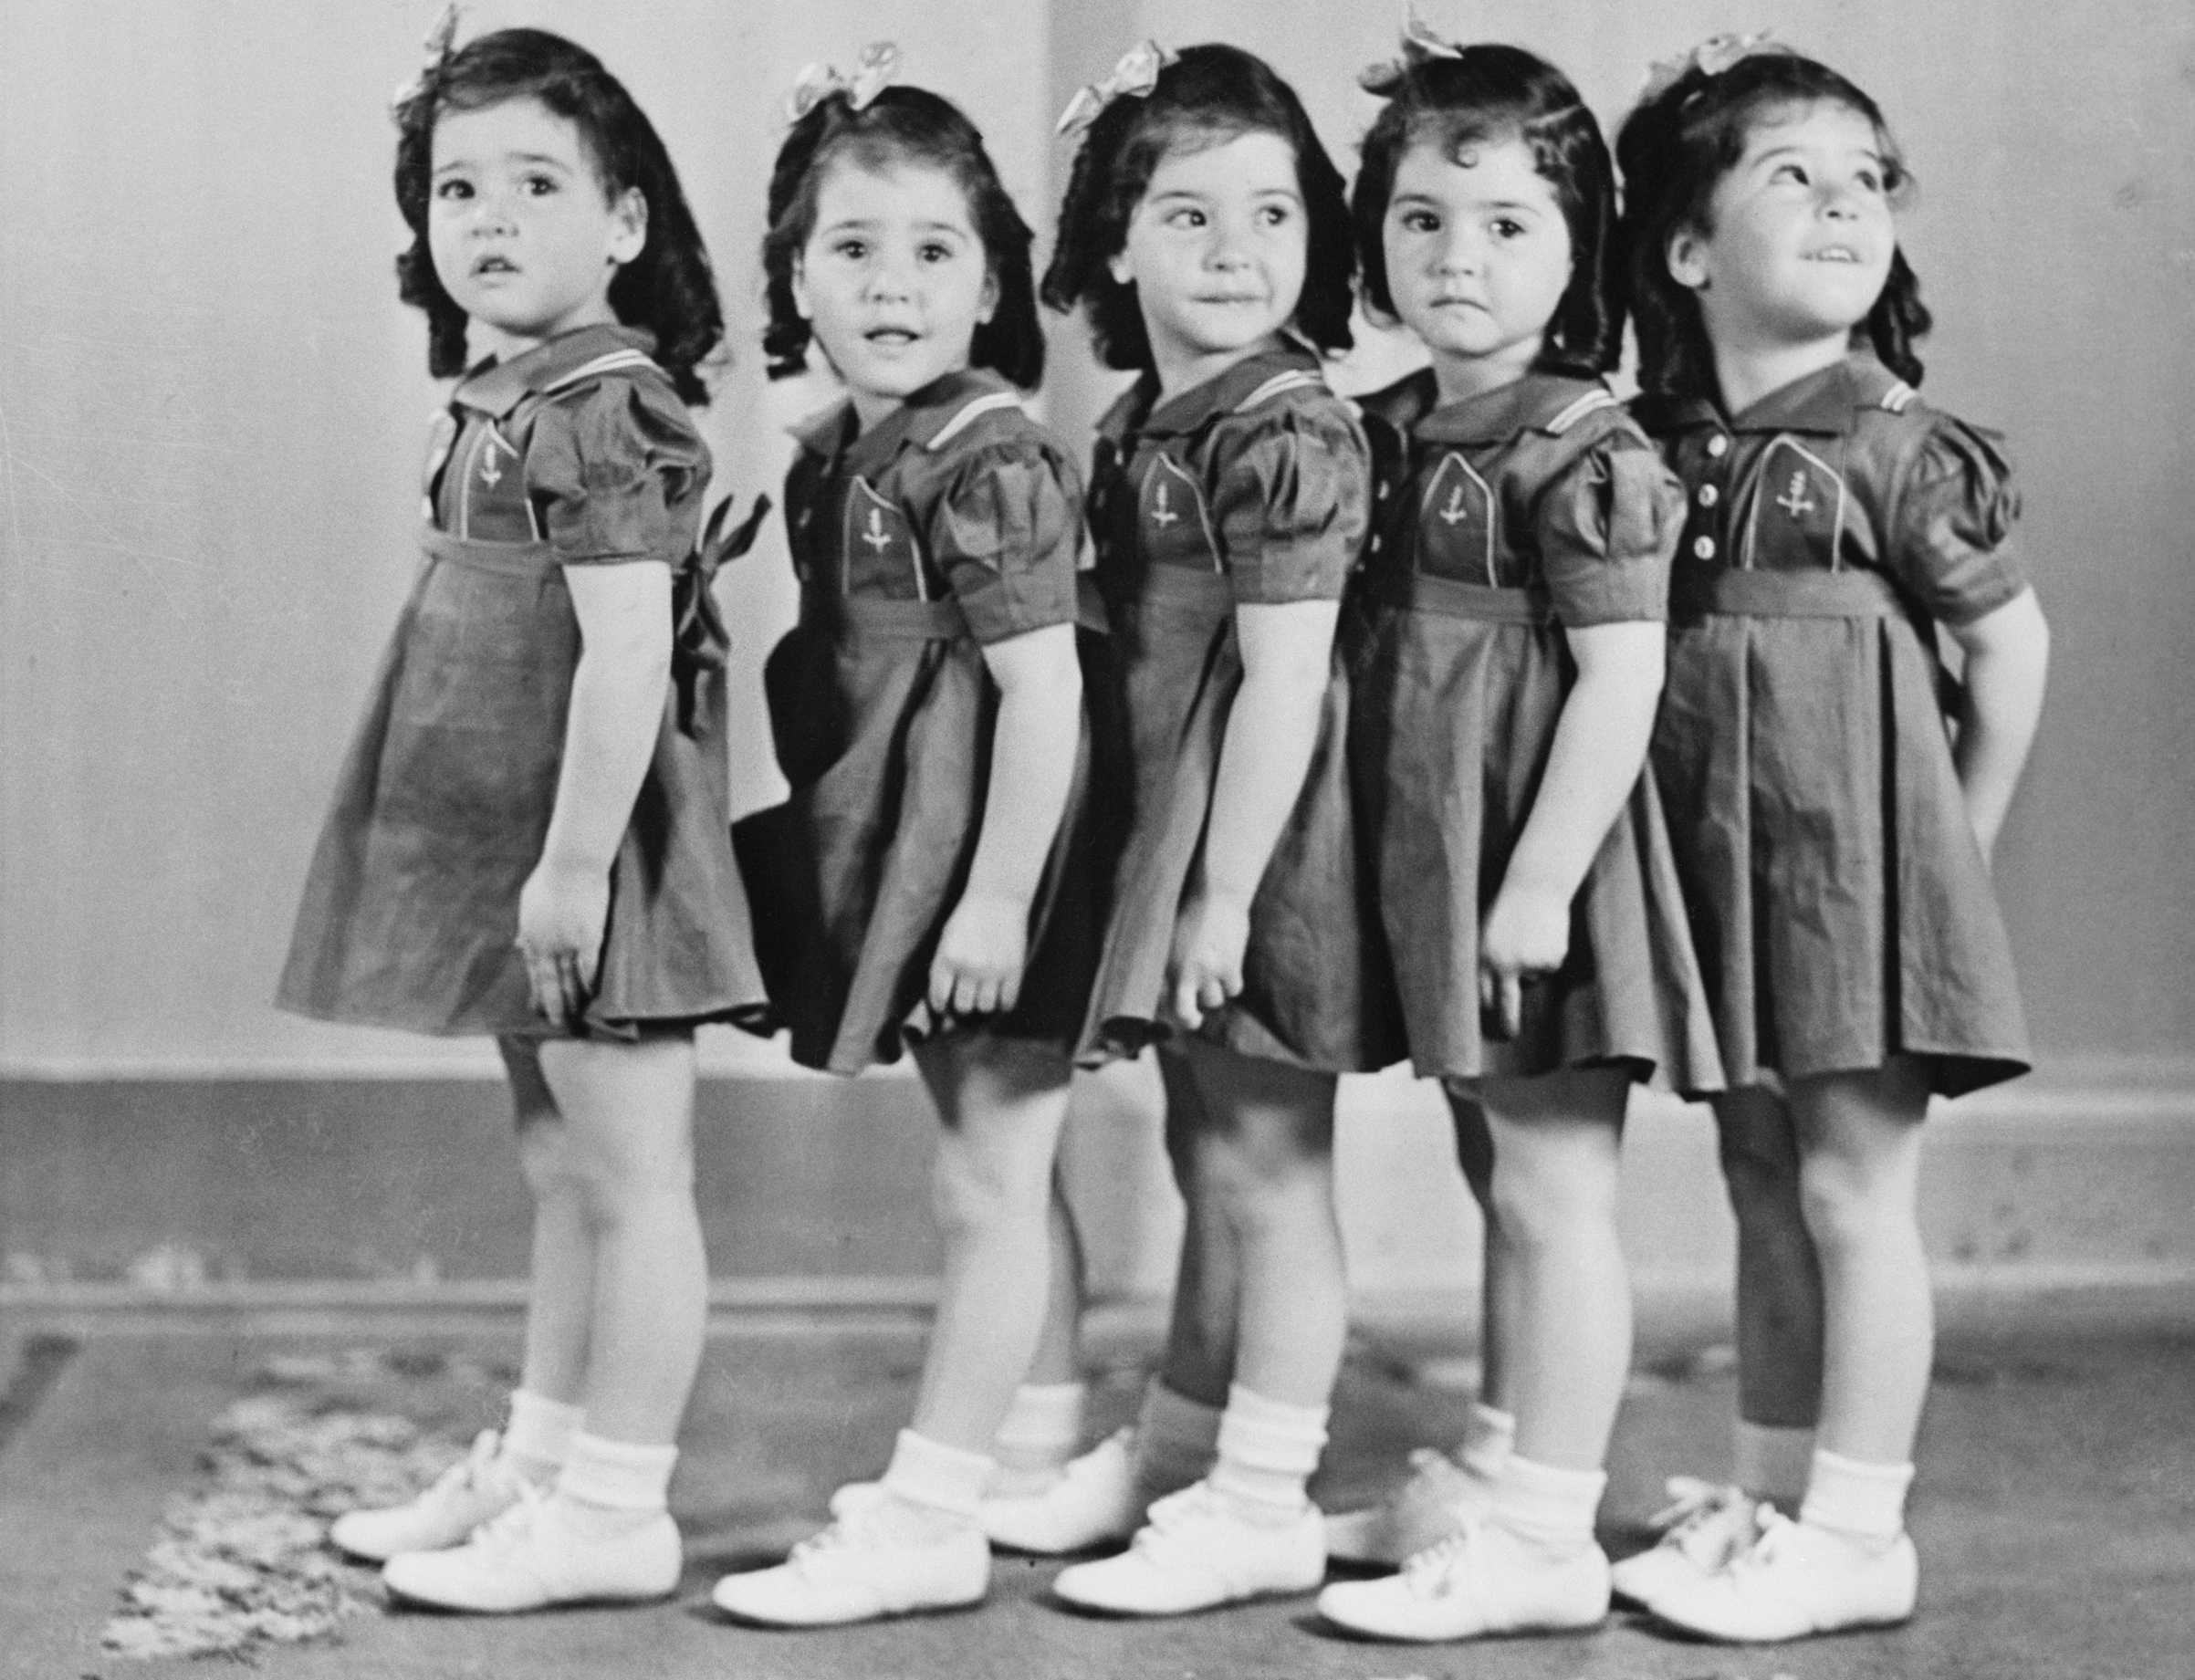 The world-famed Dionne Quintuplets in 1938 when they were 4 years old. (Bettmann/Getty Images)